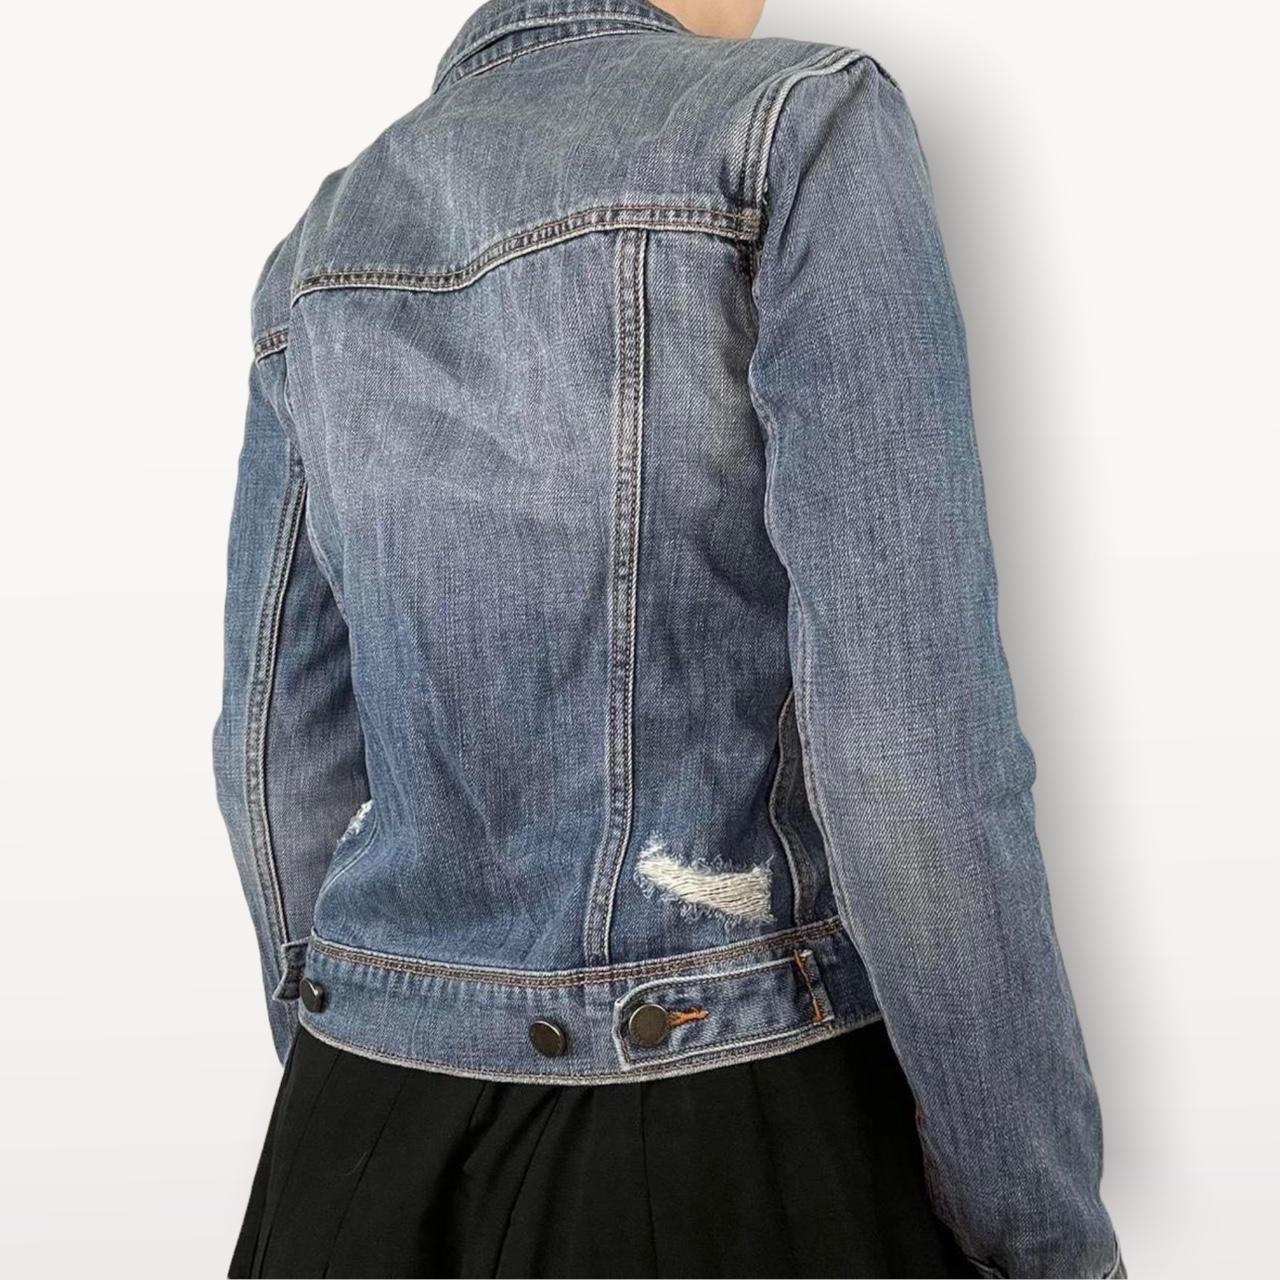 Product Image 2 - Distressed button up jean jacket